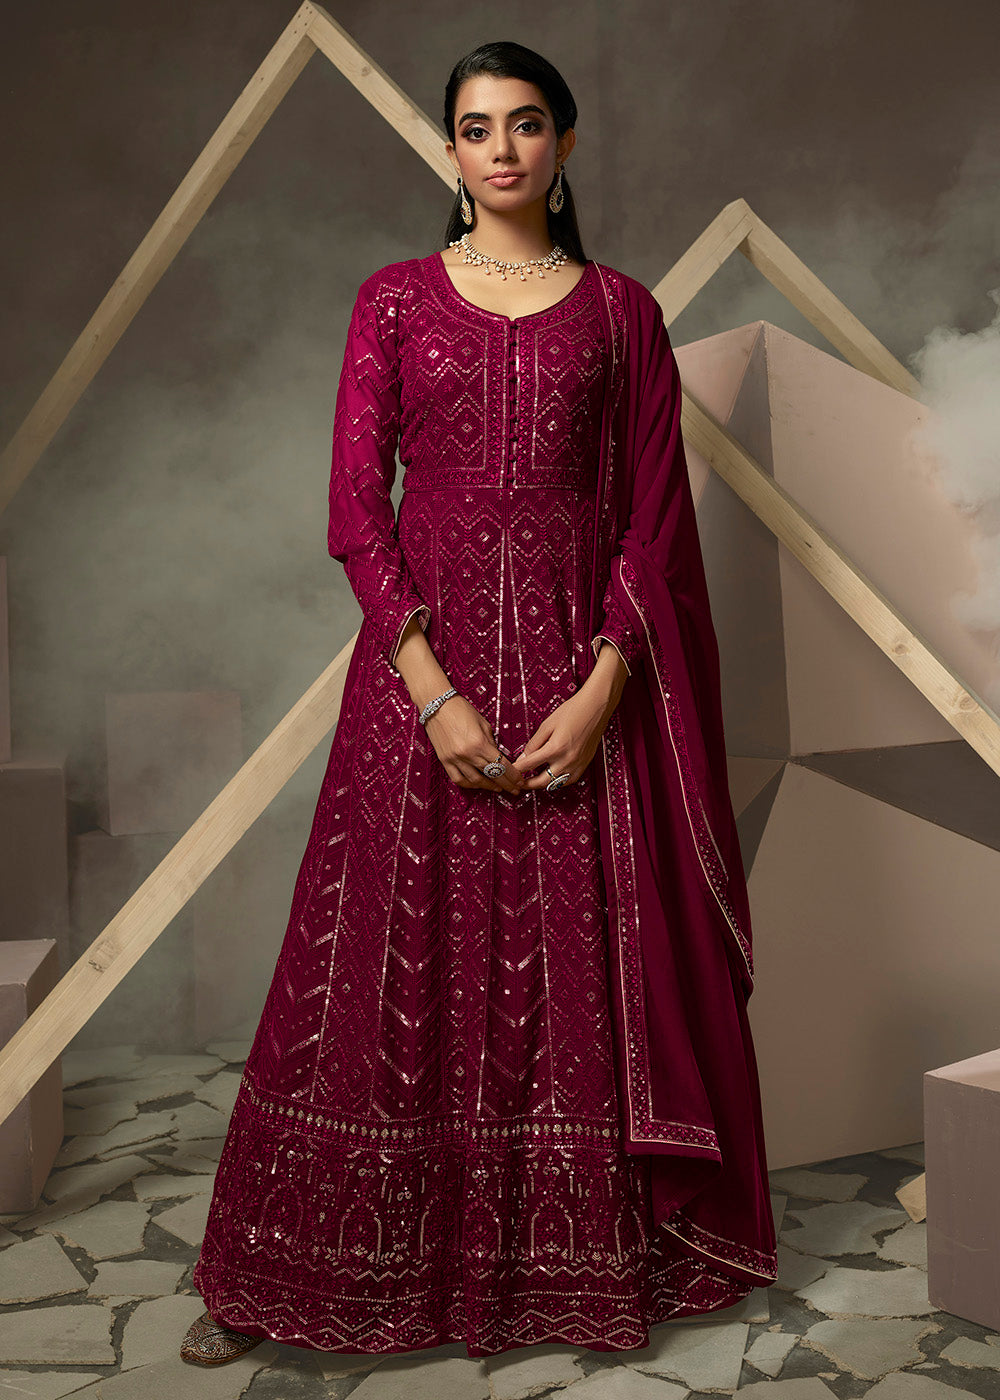 Buy Now Rani Pink Lucknowi Style Embroidered Georgette Gown Online in USA, UK, Australia, New Zealand, Canada & Worldwide at Empress Clothing. 